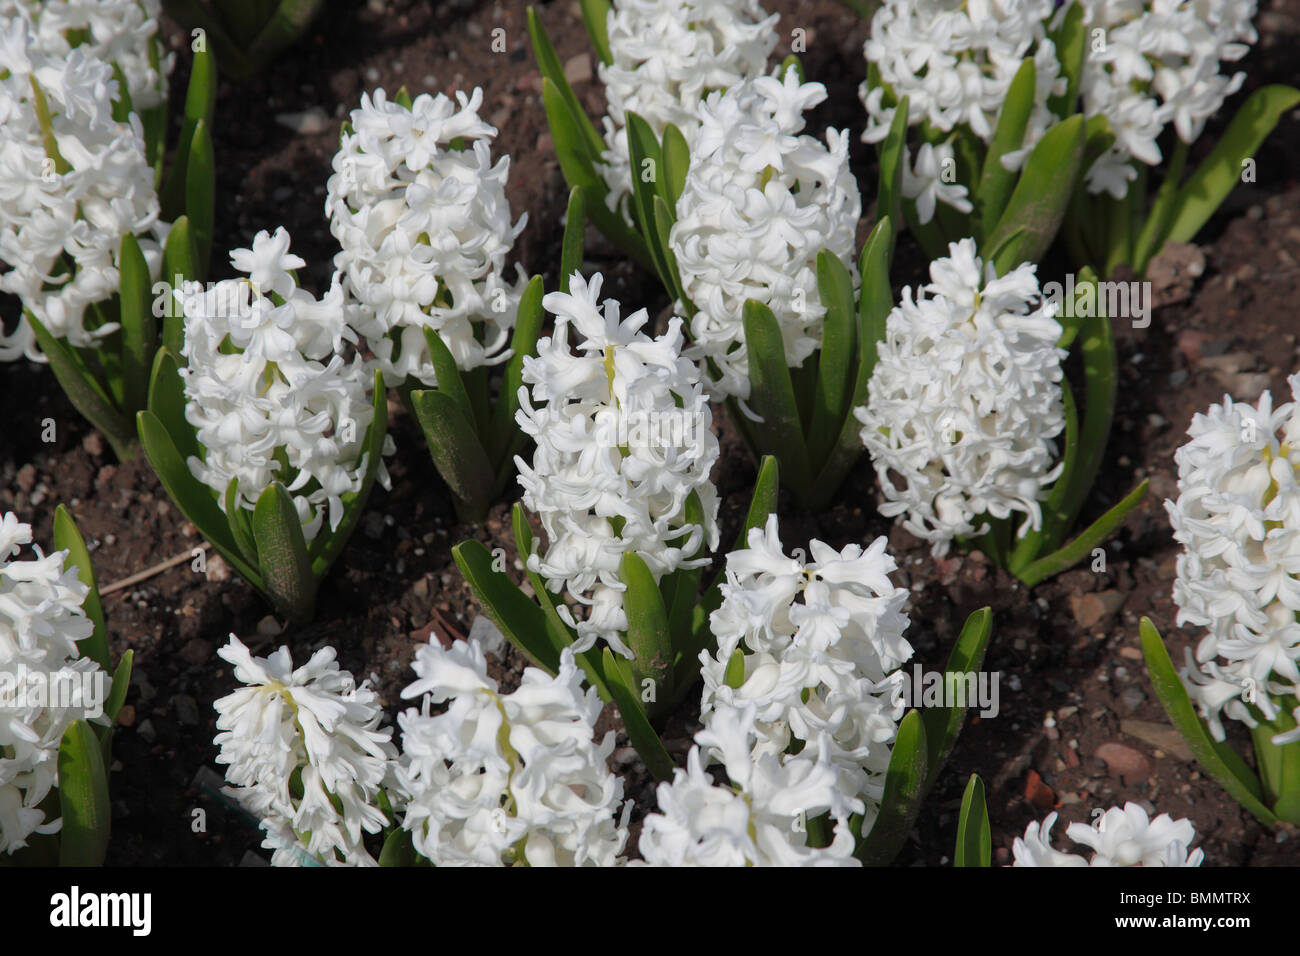 Hyacinthus Aiolos plants in flower Stock Photo